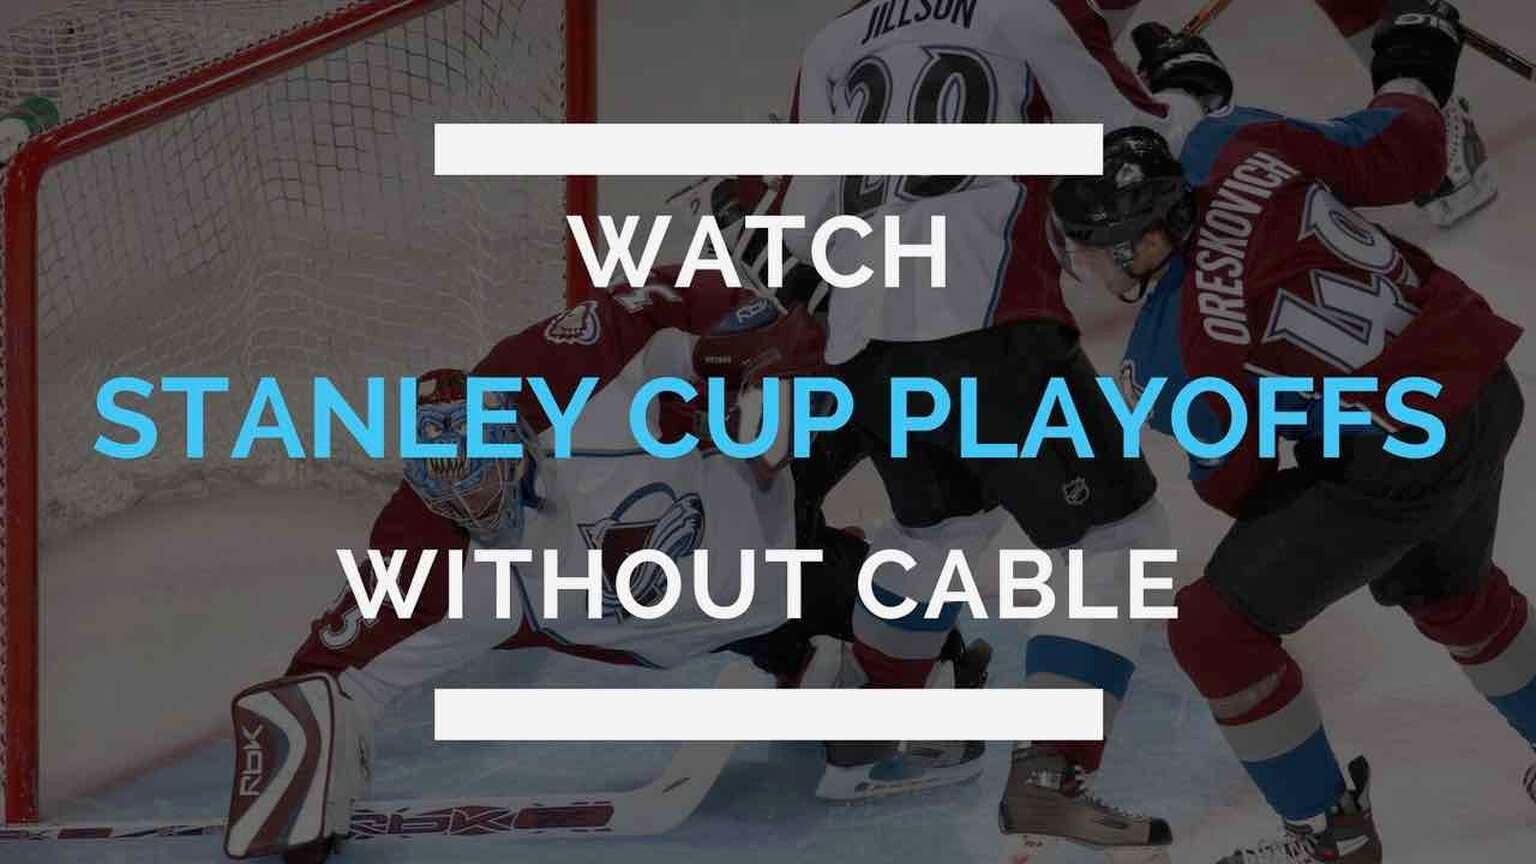 https://thestreamable.com/media/pages/sports/nhl/stanley-cup-playoffs/79e357f5f9-1576040064/music-8-1-1536x864-crop.jpg